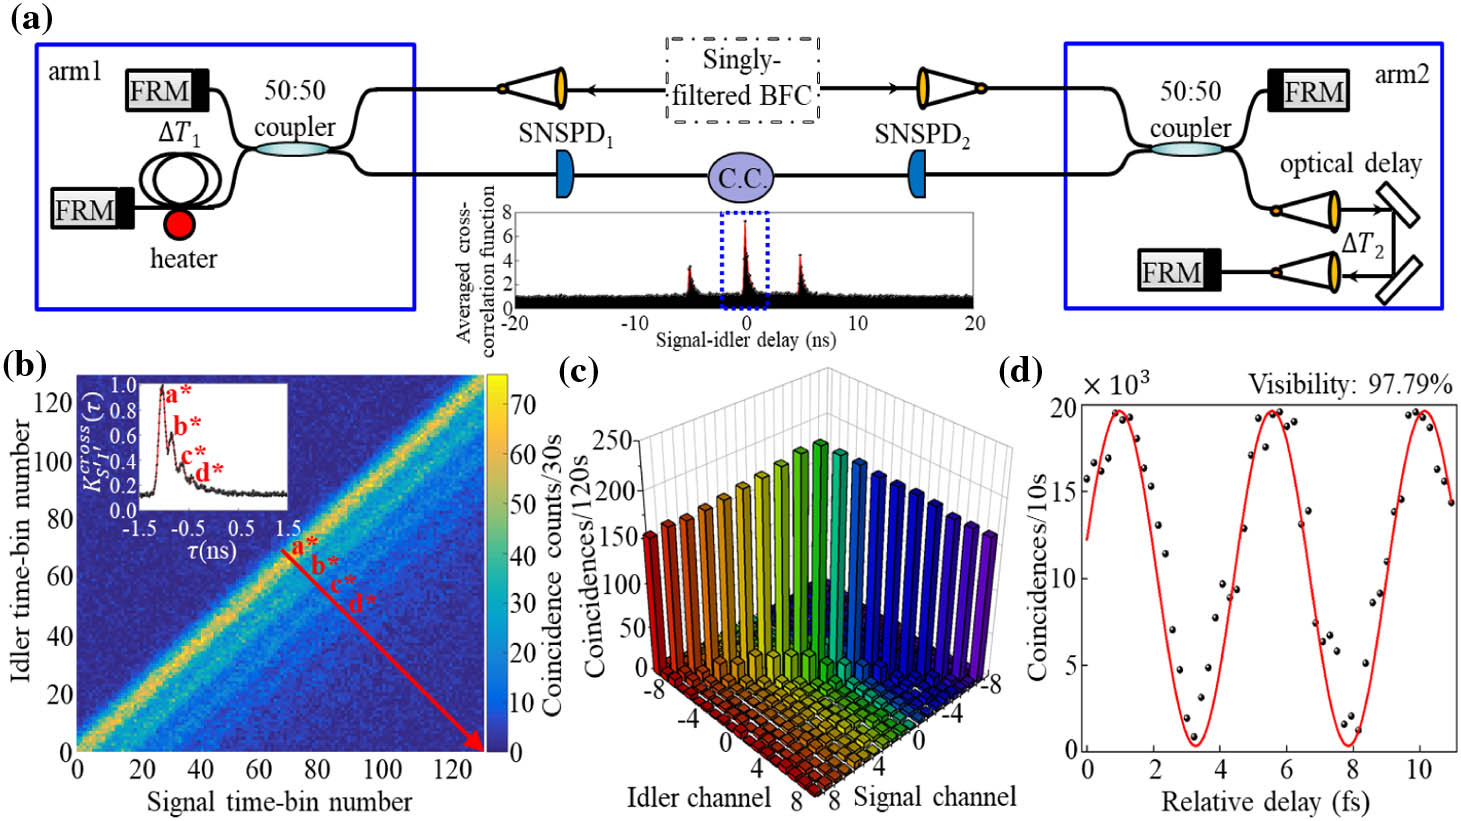 Measured single-photon cross correlations and time-energy entanglement using a 5.03 GHz FSR singly filtered BFC. (a) Schematic of experimental configuration. FRM, Faraday mirror; C.C., coincidence counts; SNSPD, superconducting nanowire single-photon detector. Inset: the signature of observed Franson interferences, with the single-sided correlation function revealed (see the highlighted region in the blue dashed lines). (b) Measured JTI of a 5.03 GHz FSR singly filtered BFC. The photon coincidence data are recorded between two detectors, and we sift the coincidence data into frames of duration d×Tbin, composed of d time bins of duration Tbin. We choose Tbin to be 16 ps to enhance the resolution of temporal correlations. This d of 128 shows that there are ∼4 clean cross correlations from a* to d* in our 5.03 GHz singly filtered BFC. The red arrow indicates both the cross sections of measured JTI [also shown in the inset of (b)], and the direction of singly filtered temporal waveform. Inset: measured zoom-in second-order cross-correlation function between signal and idler photons. The periodic structure traces the cavity round-trip time of 198.9 ps. A cavity bandwidth of 457 MHz can be derived by the exponential decay of the envelope. Our result in the inset of (b) is consistent with our results in (b). (c) Example measured JSI of a 5.03 GHz FSR singly filtered BFC. For these measurements, we use a pair of tunable frequency filters to scan from the −9 to +9 frequency bins. (d) The observed quantum time-energy entanglement of a 5.03 GHz FSR singly filtered BFC source and witnessed Franson fringe with an accidental-subtracted visibility of 97.79% for central time bin.